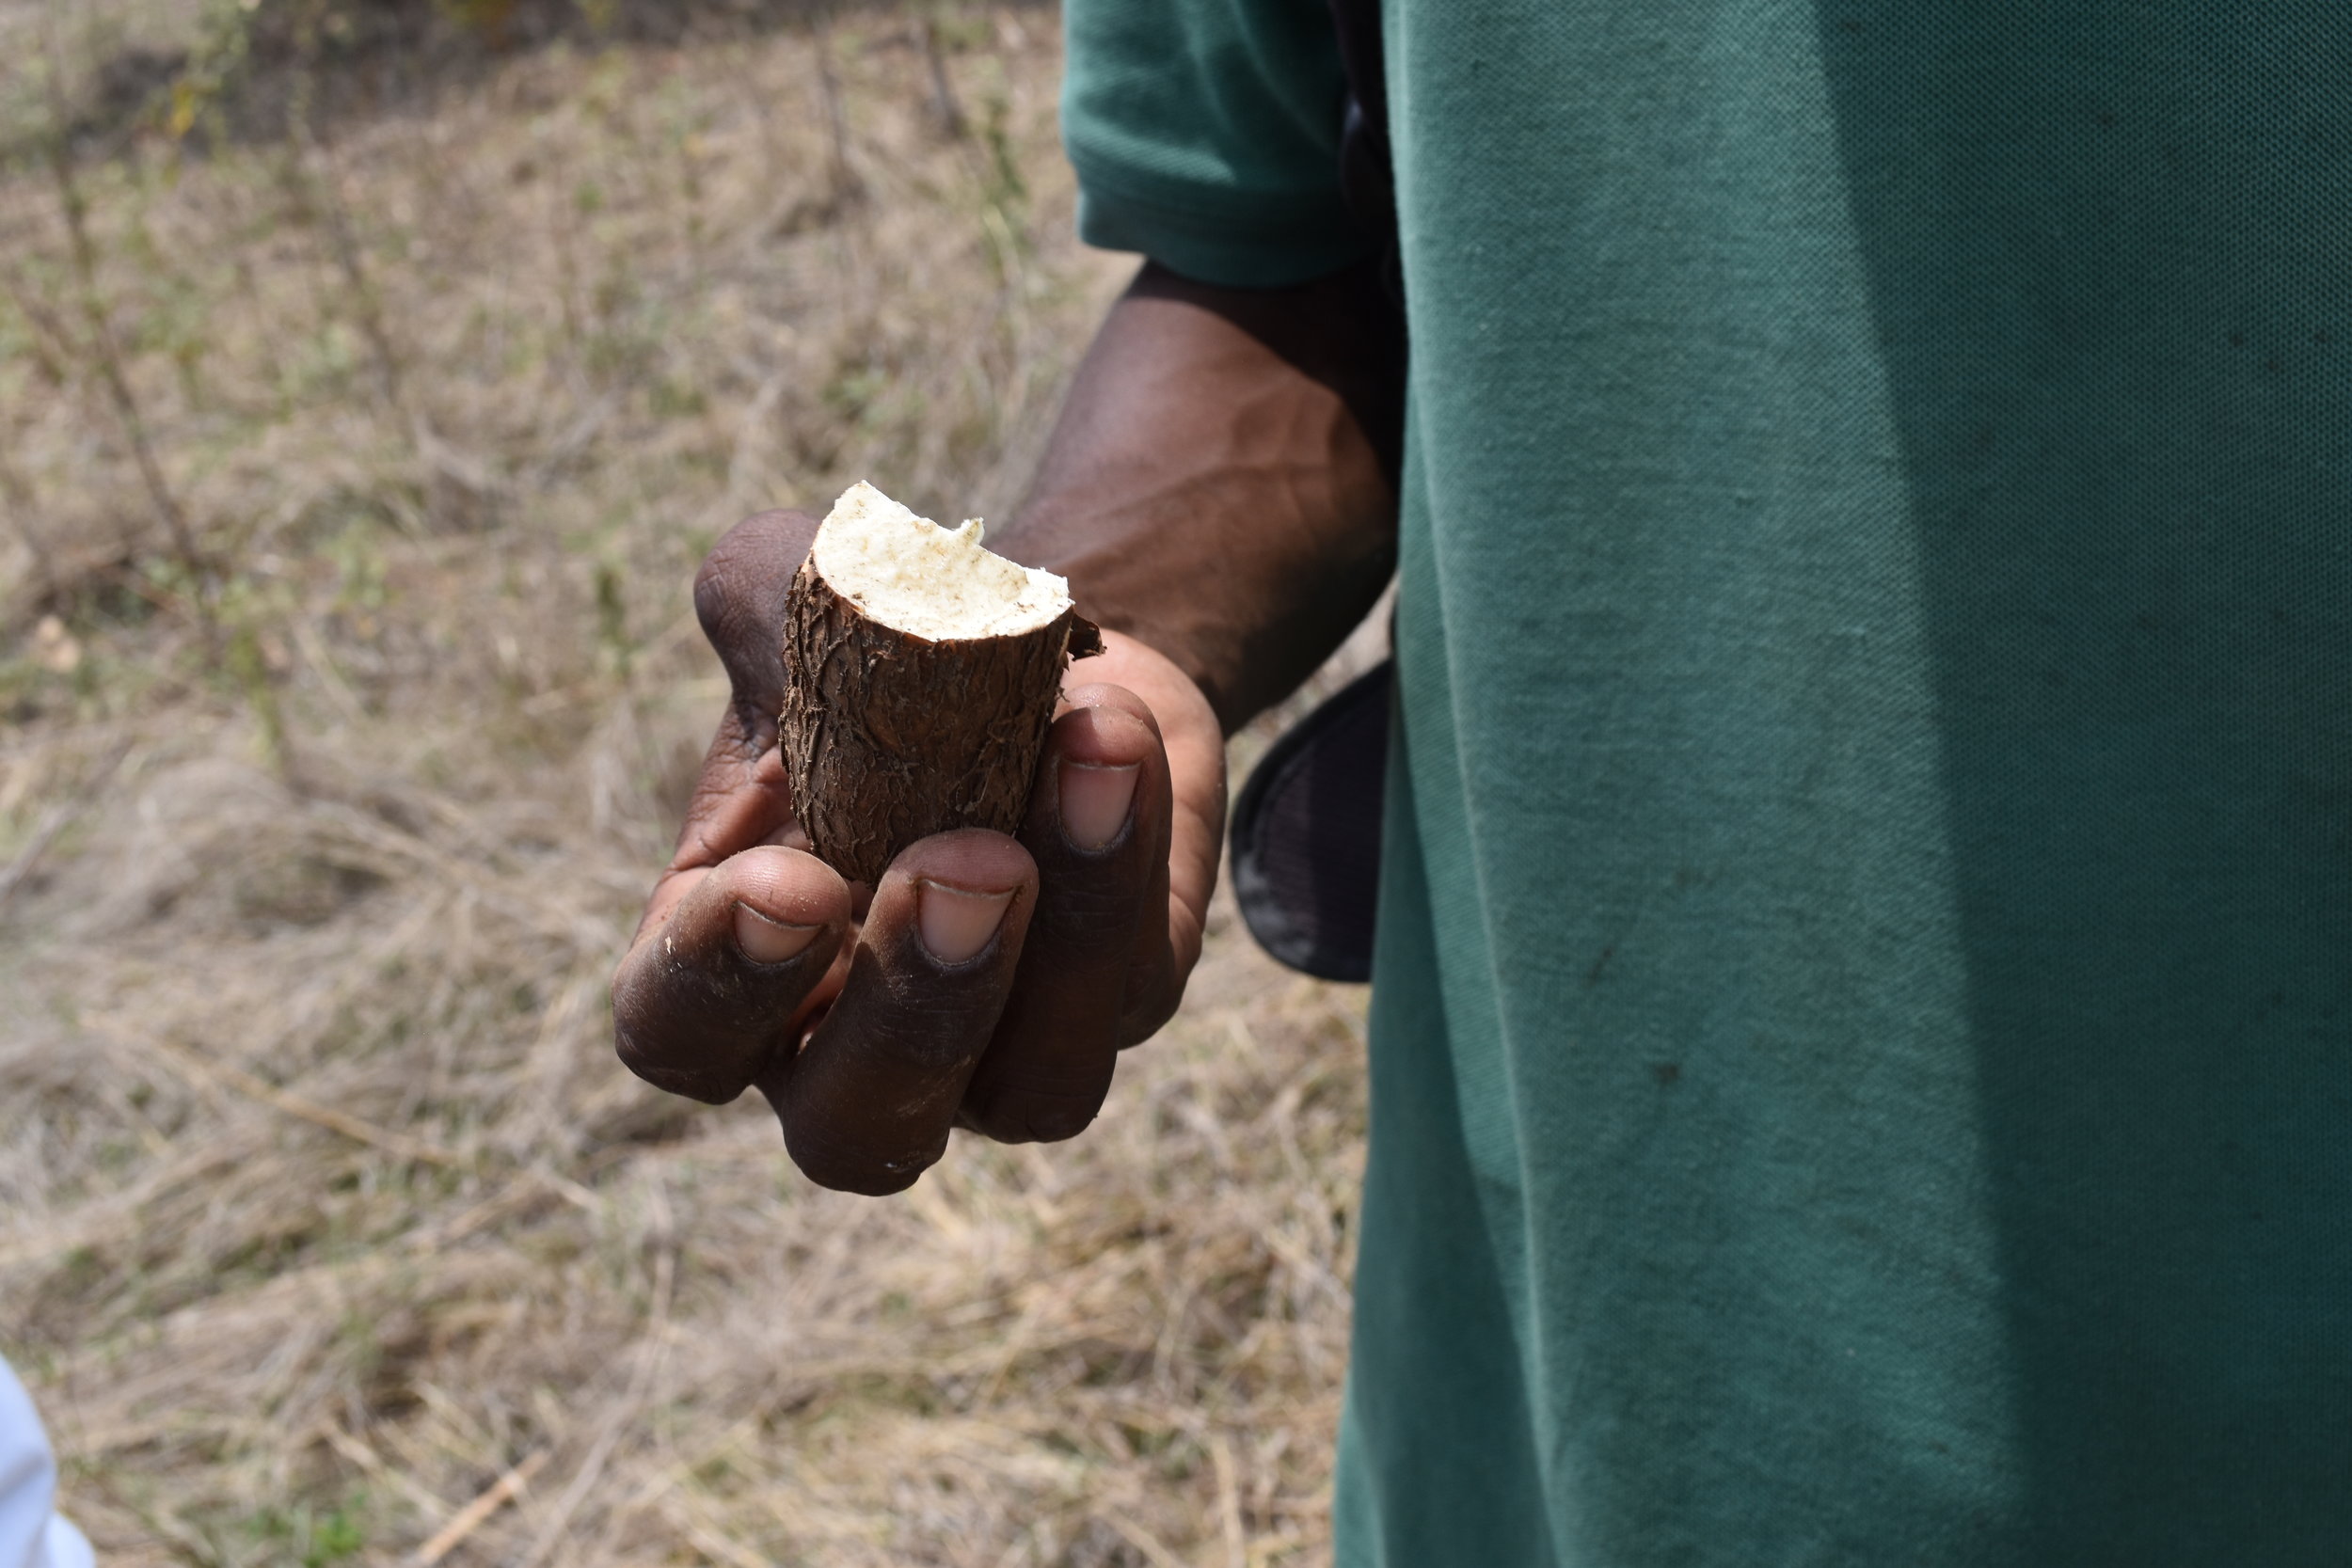  Andral tore open the outer skin of the manioc and ate the raw root crop. 